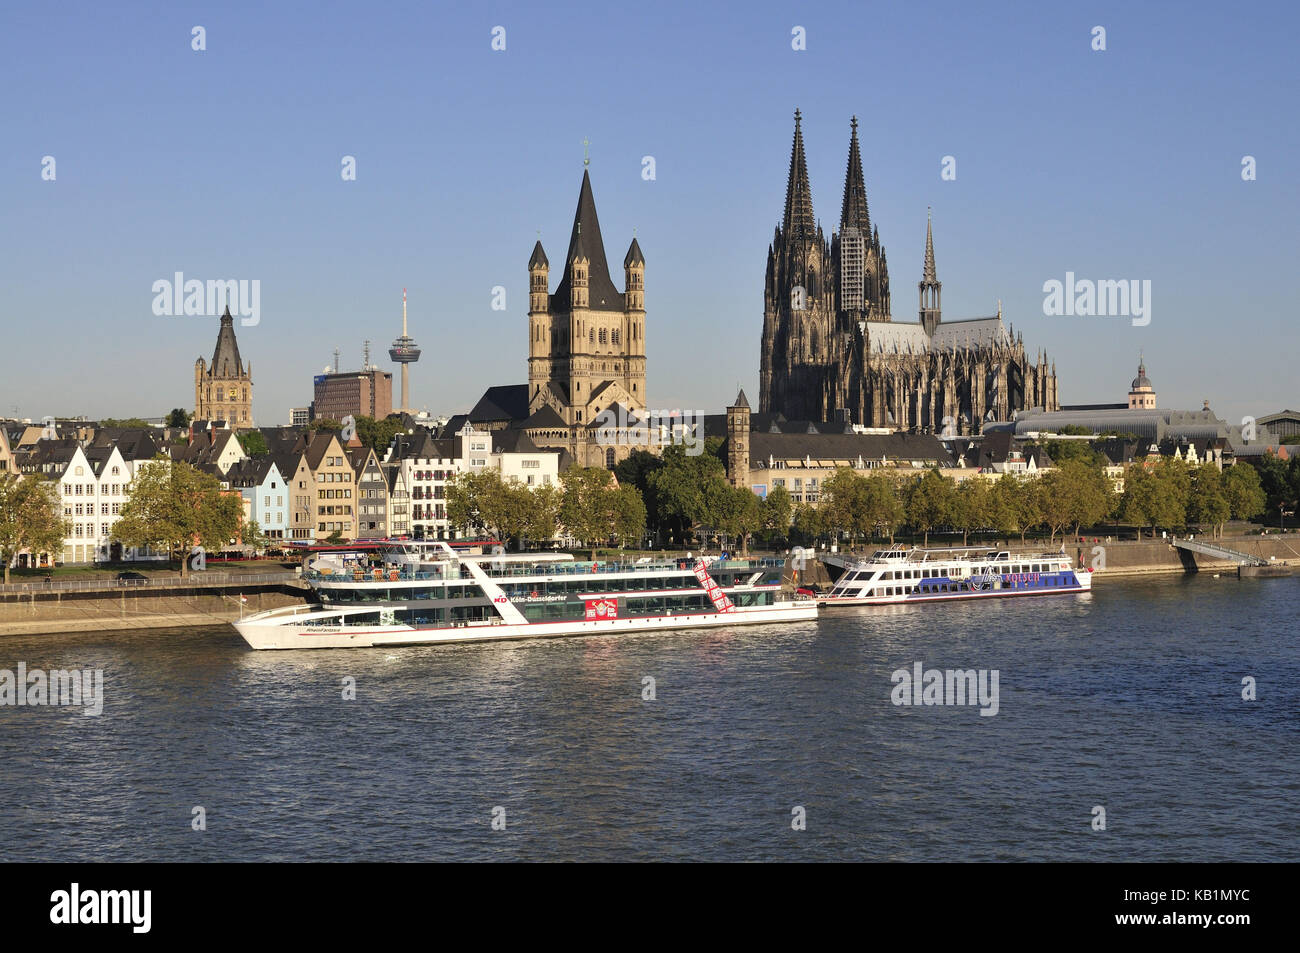 Germany, North Rhine-Westphalia, Cologne, city, Rhine match, Groß Sankt Martin and cathedral, holiday ships, Stock Photo